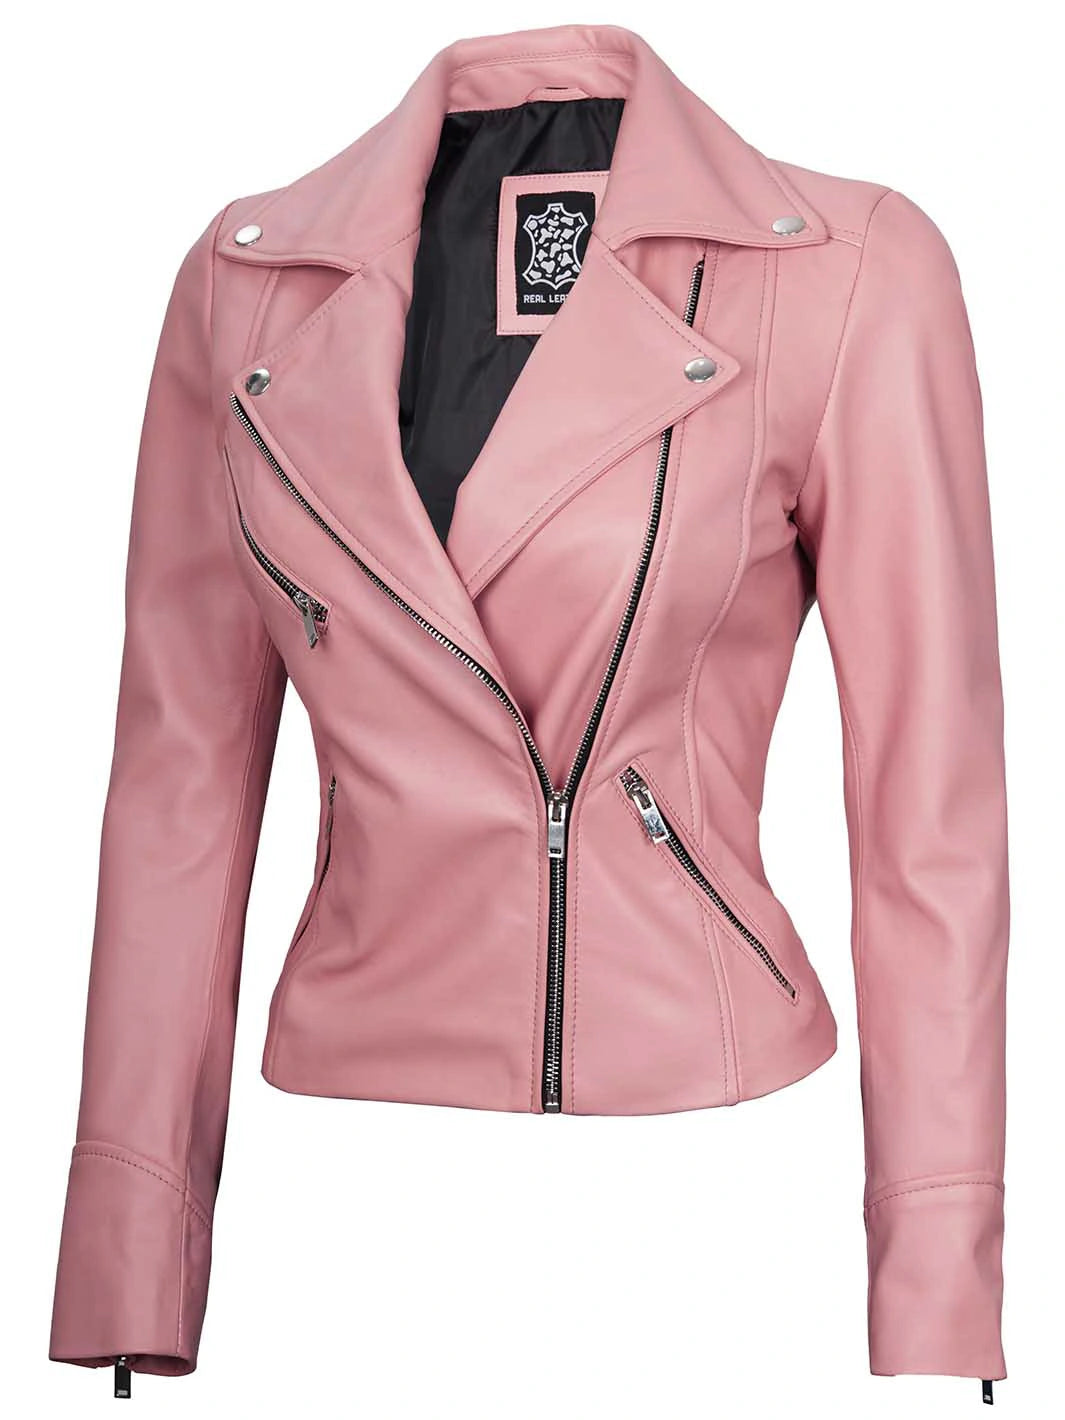 Pink leather jacket for women